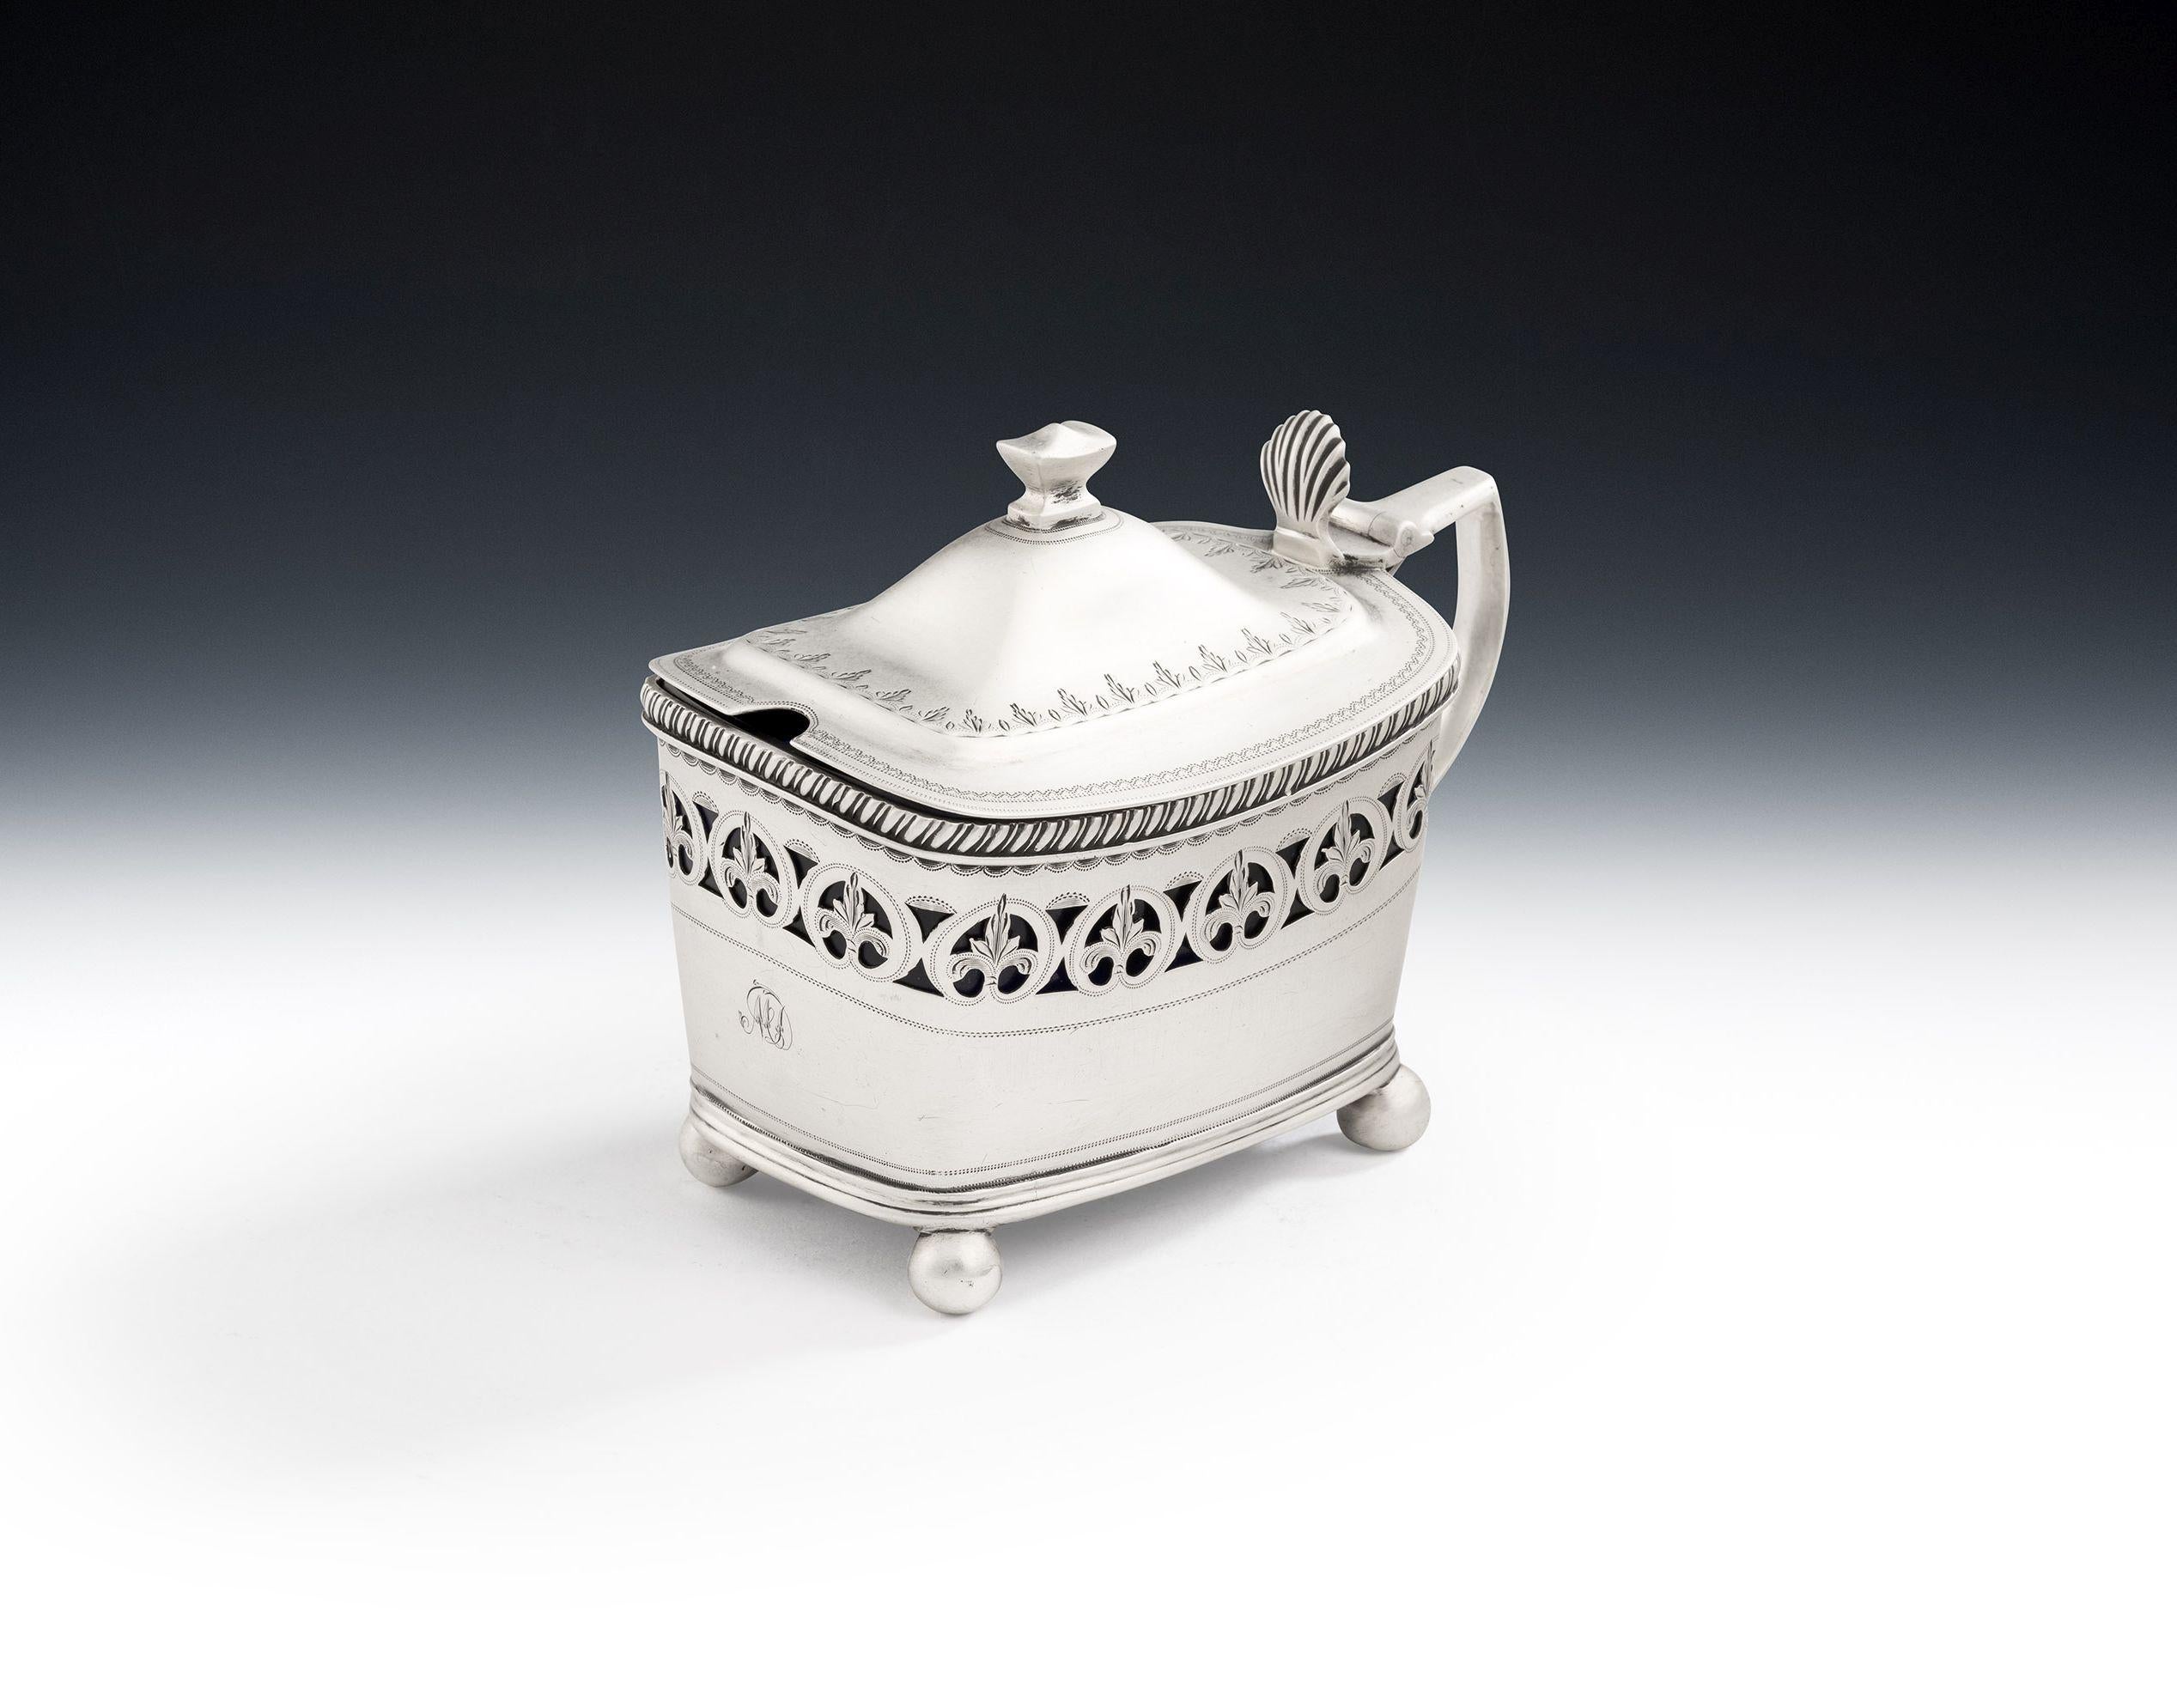 A VERY RARE GEORGE III MUSTARD POT
MADE IN LONDON IN 1811 BY PETER & WILLIAM BATEMAN

The Mustard Pot is of an unusual square form and stands on four ball feet. The base of the main body is decorated with reeding and the rim with gadrooning. The